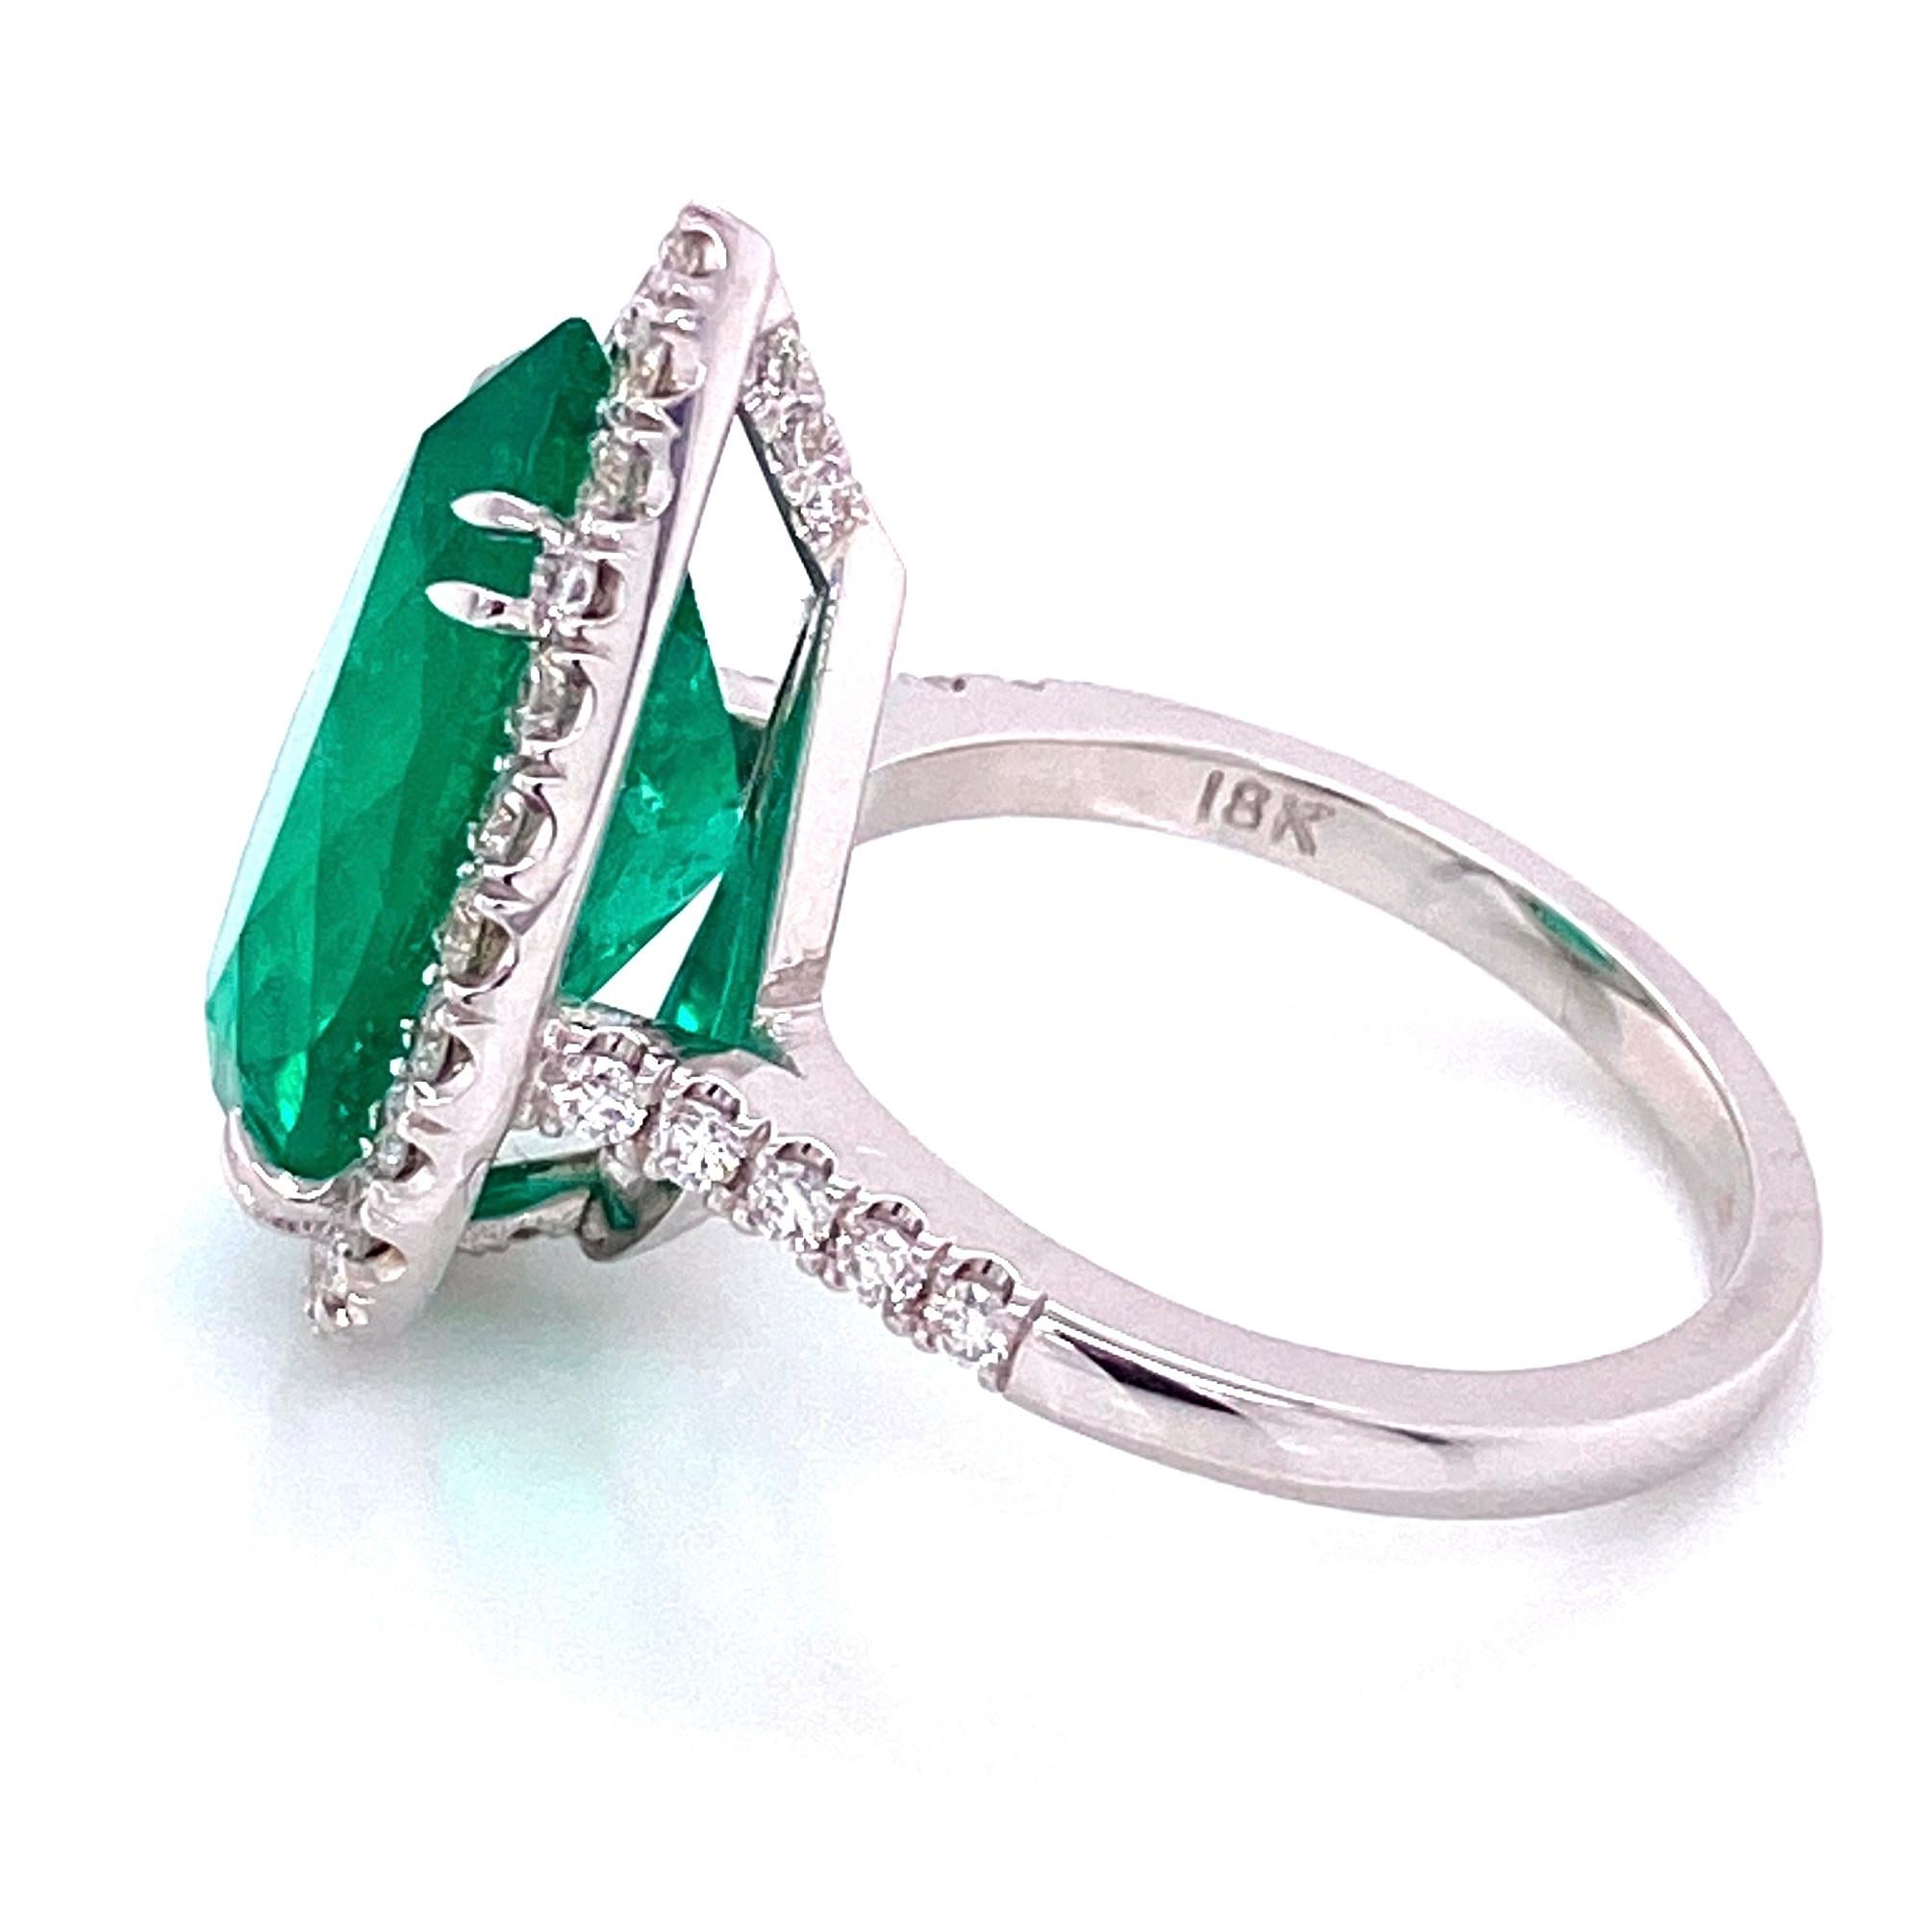 6.96 Carat Pear Shaped Emerald and Diamond Ring Estate Fine Jewelry For Sale 2